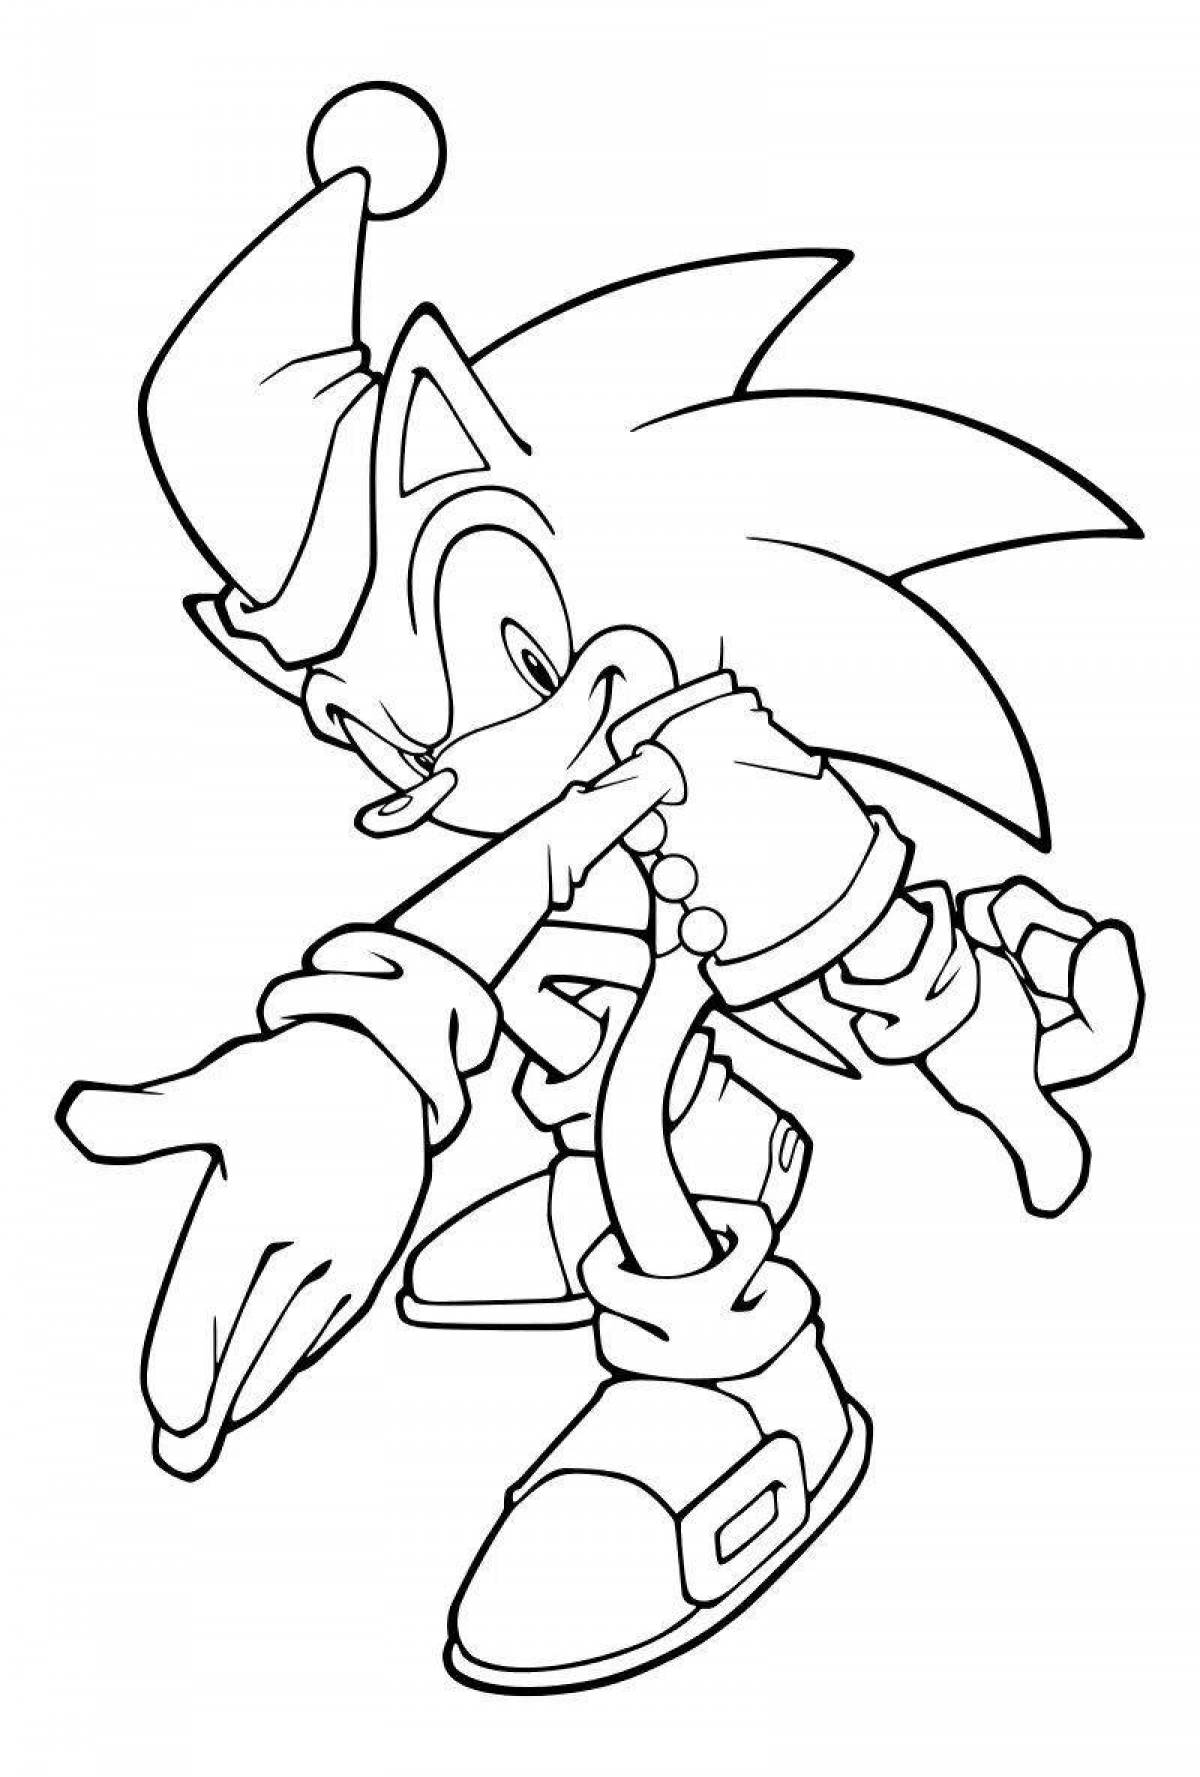 Exciting sonic game coloring book